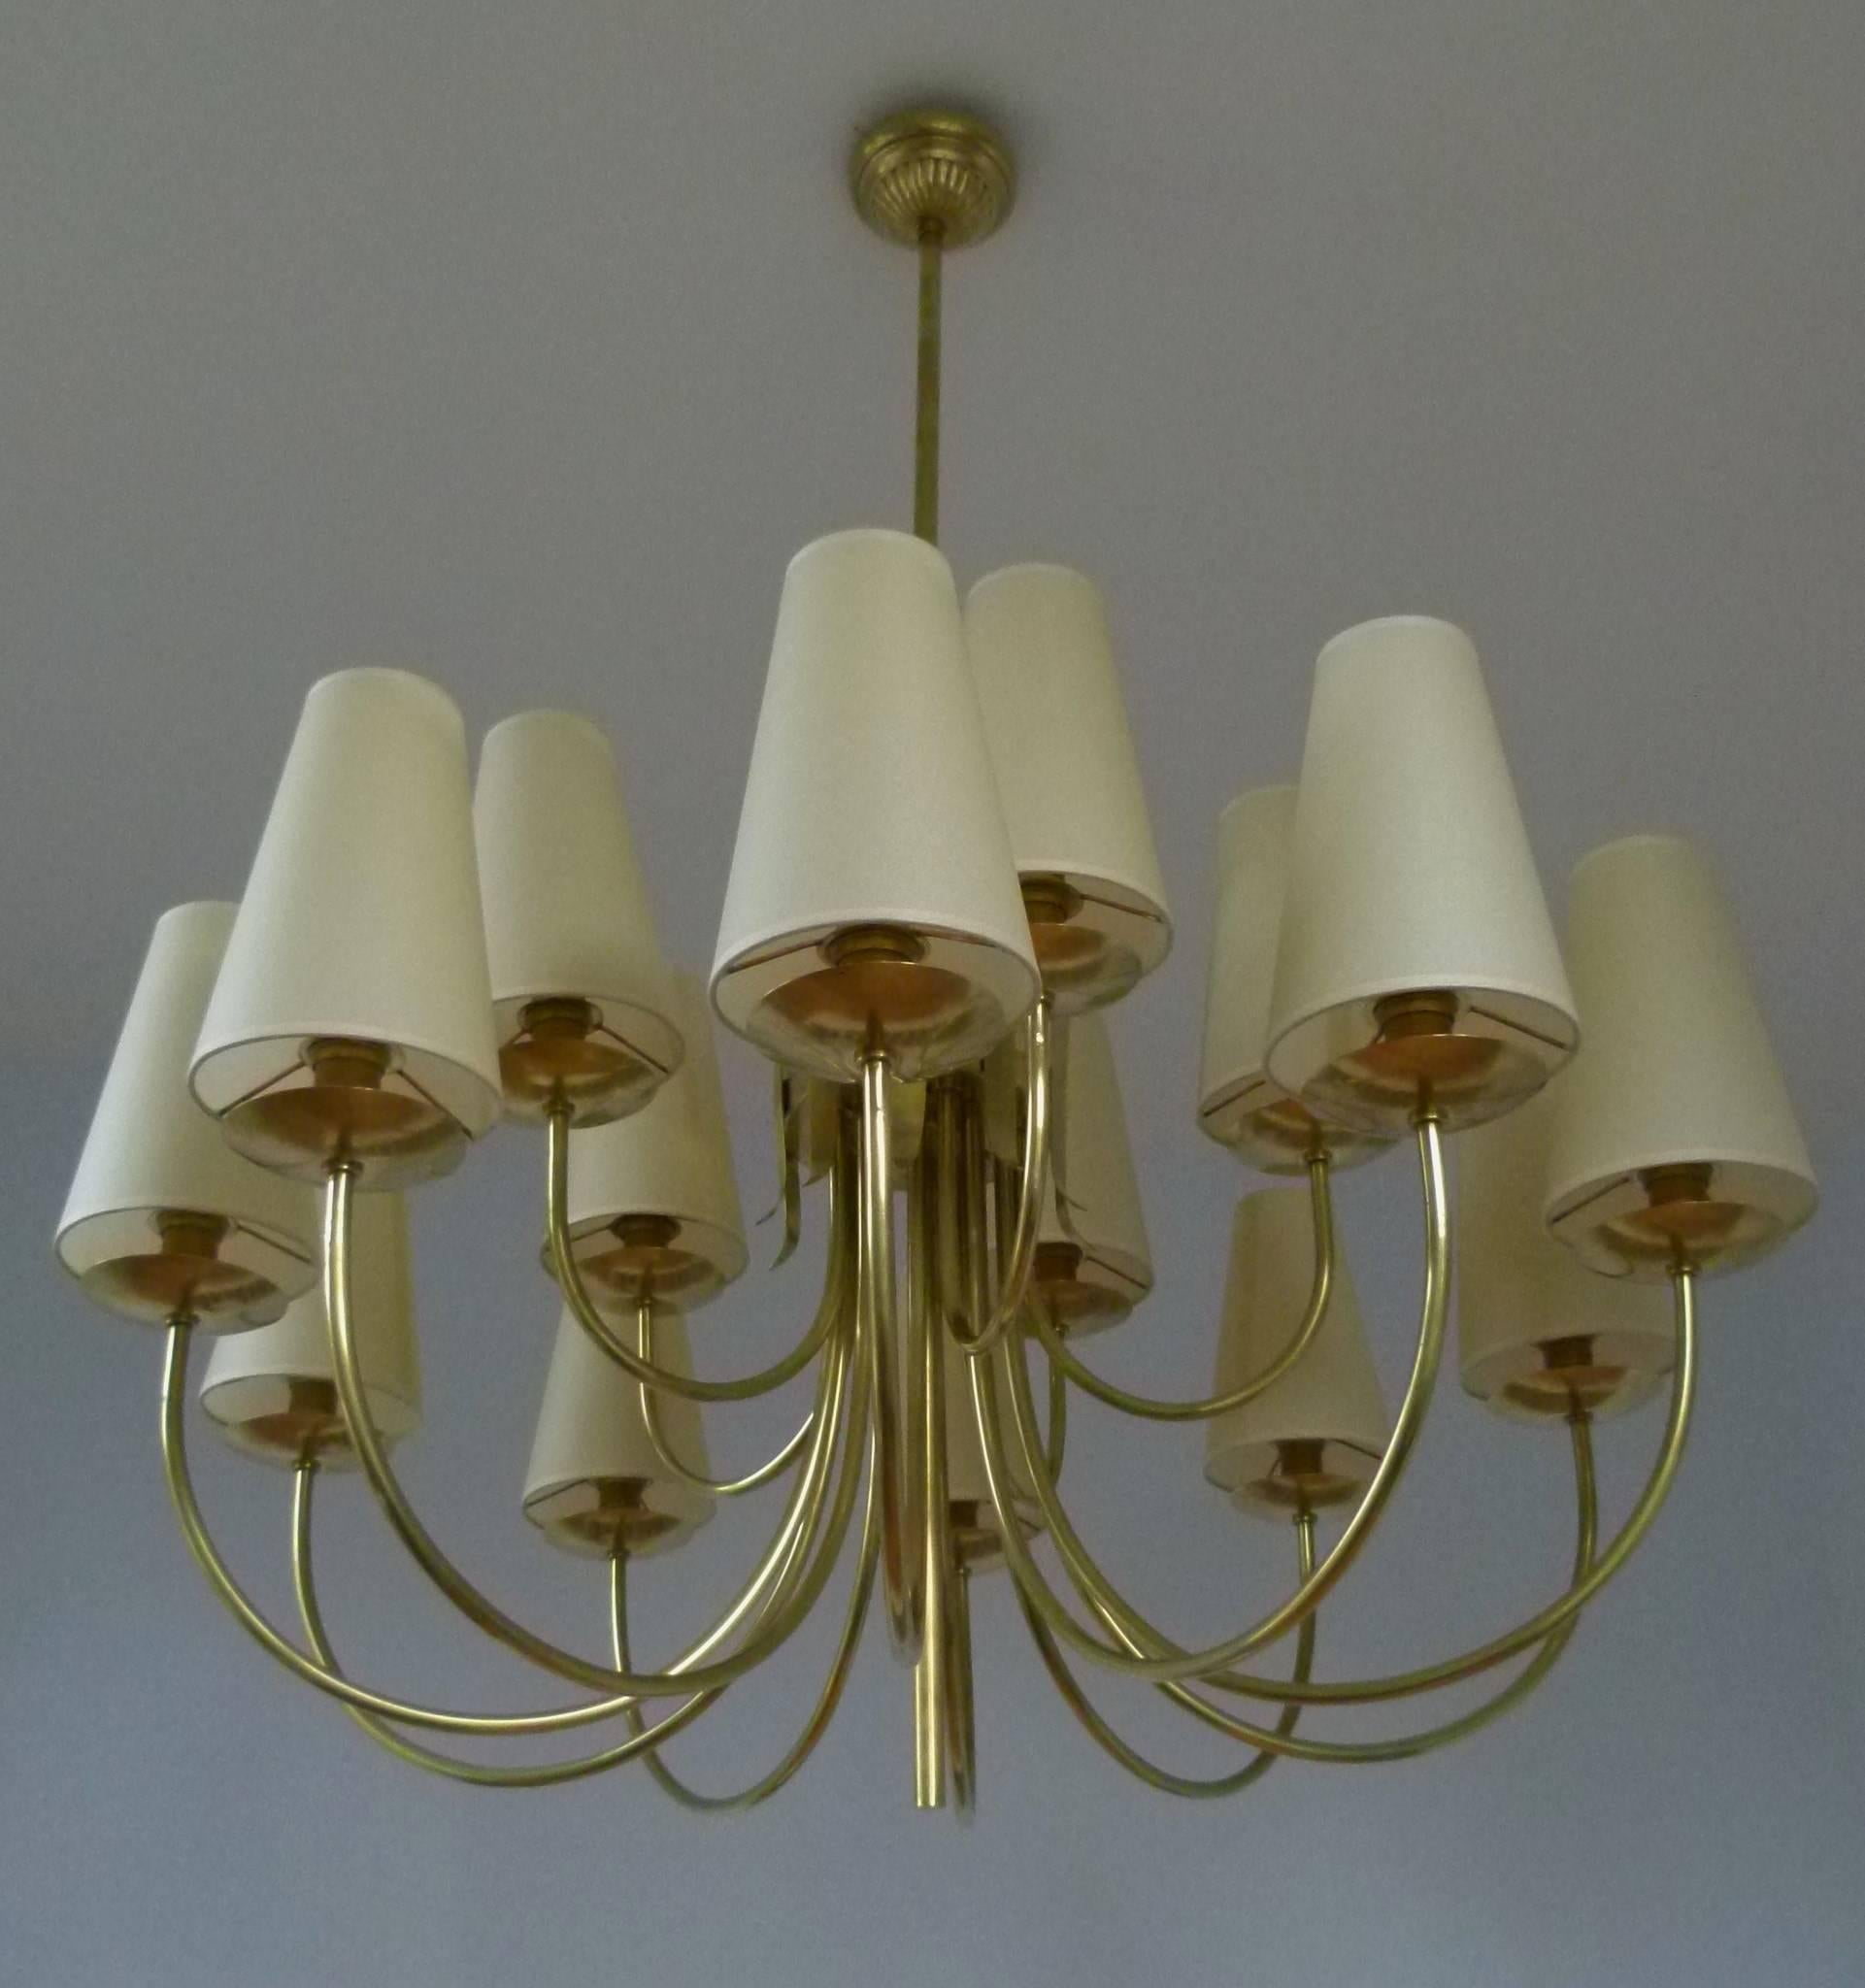 Large brass chandeliers composed of fifteen curved lighted arms. The arms are arranged in two rows. Ten at the bottom and five at the top and are terminated by brass discs supporting conical lampshades.
The lighted arms are fixed on a cylindrical